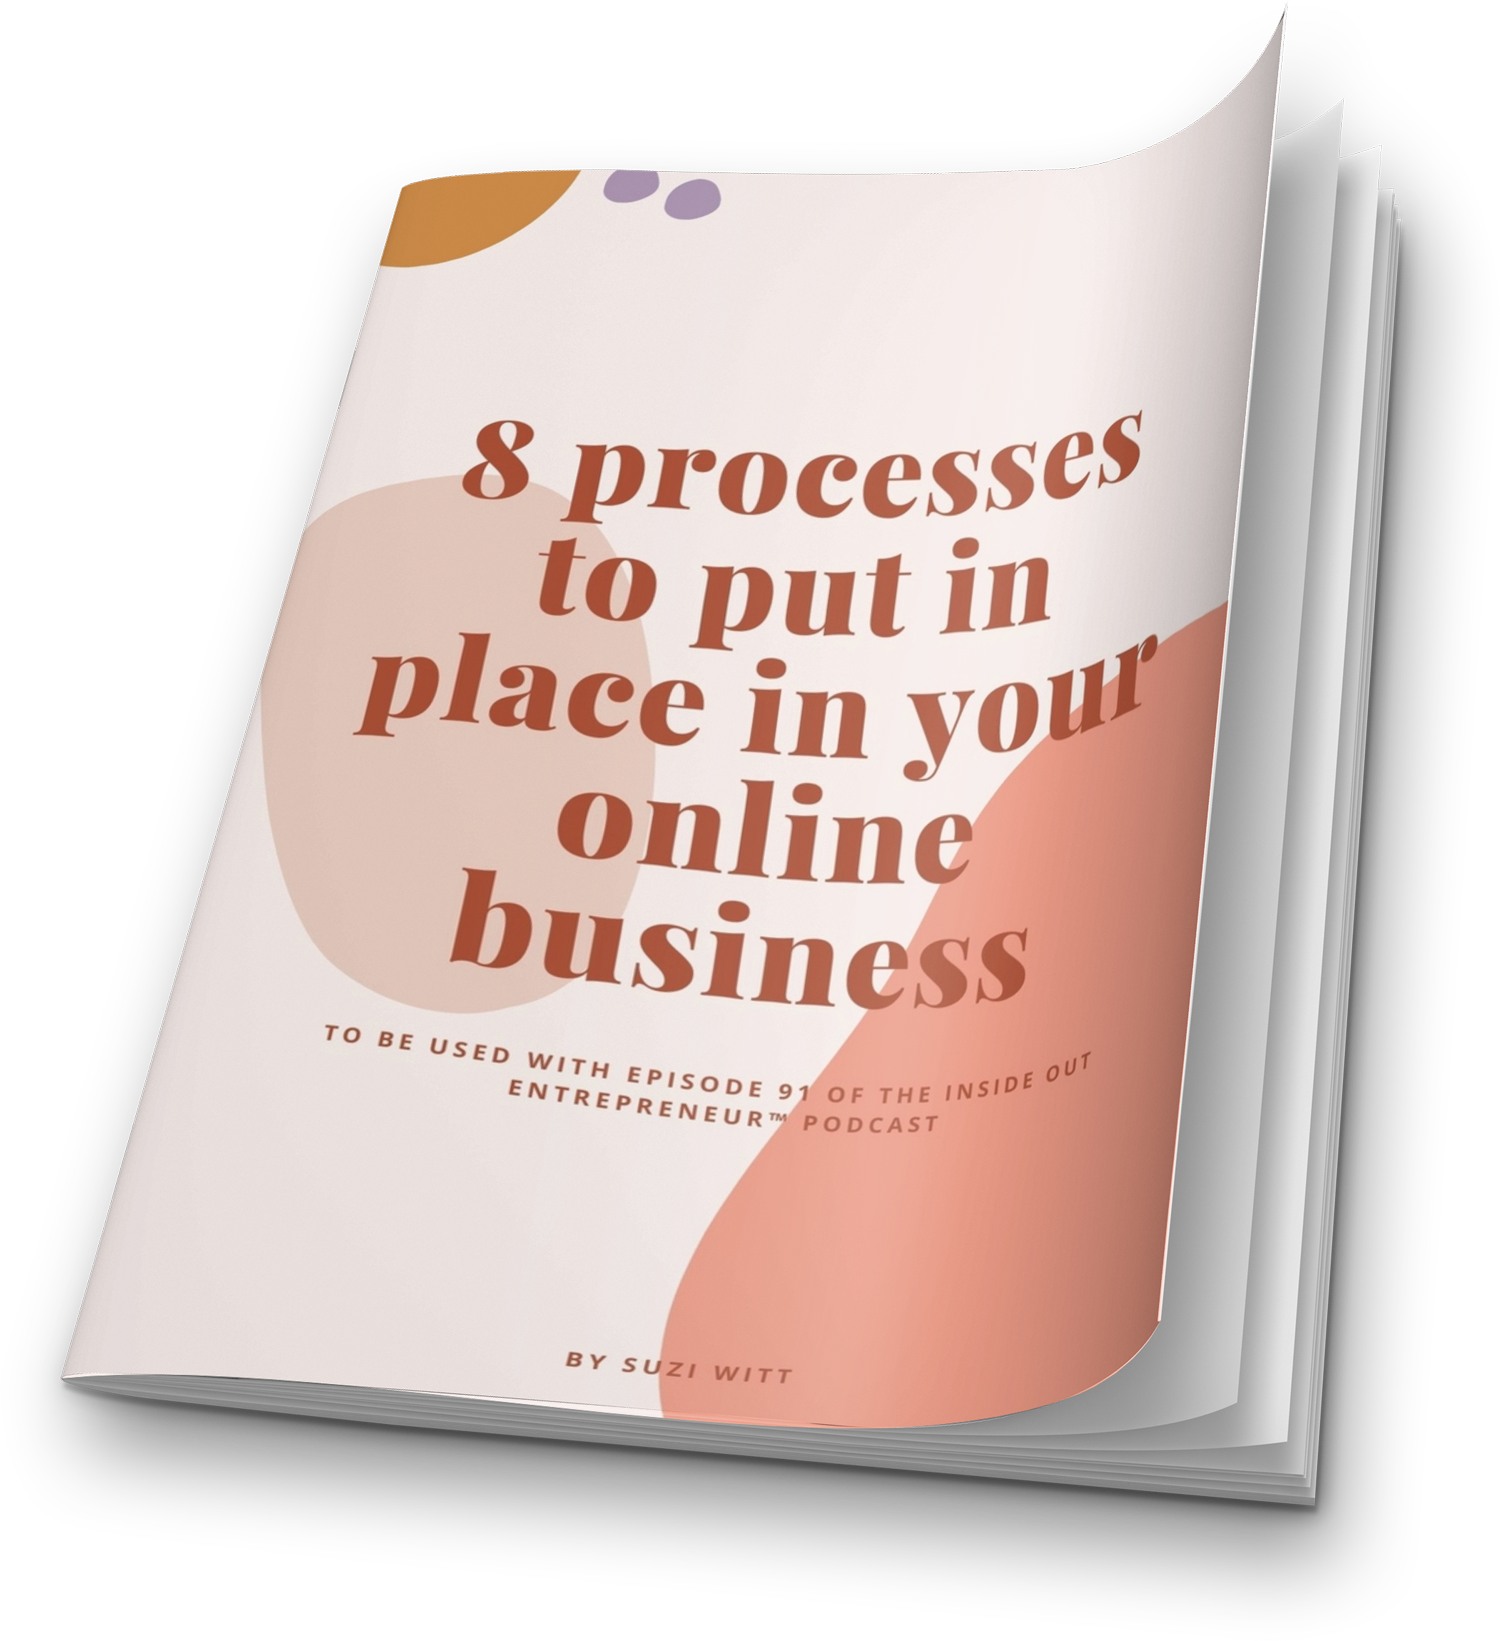 8 processes to put in place in your online business guide